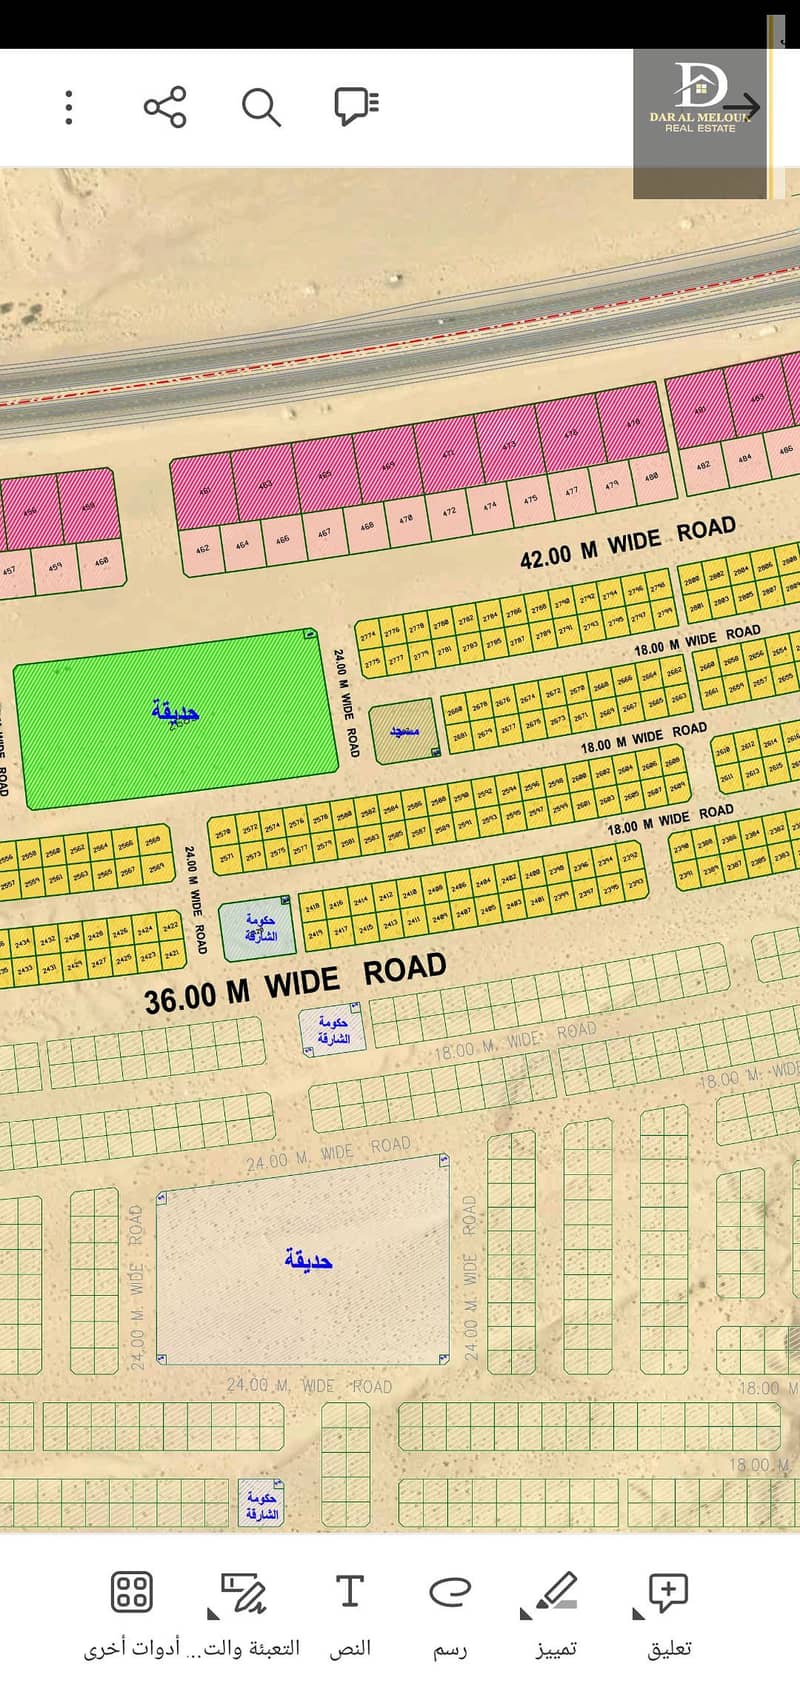 For sale in Sharjah, Al-Sahmah area, residential land, area 3000 feet, ground permit and two floors. Freehold installments completed for all Arab nationalities. Al-Sahmah area is distinguished by being close to Al Zaid Street, close to Emirates Transit Ro